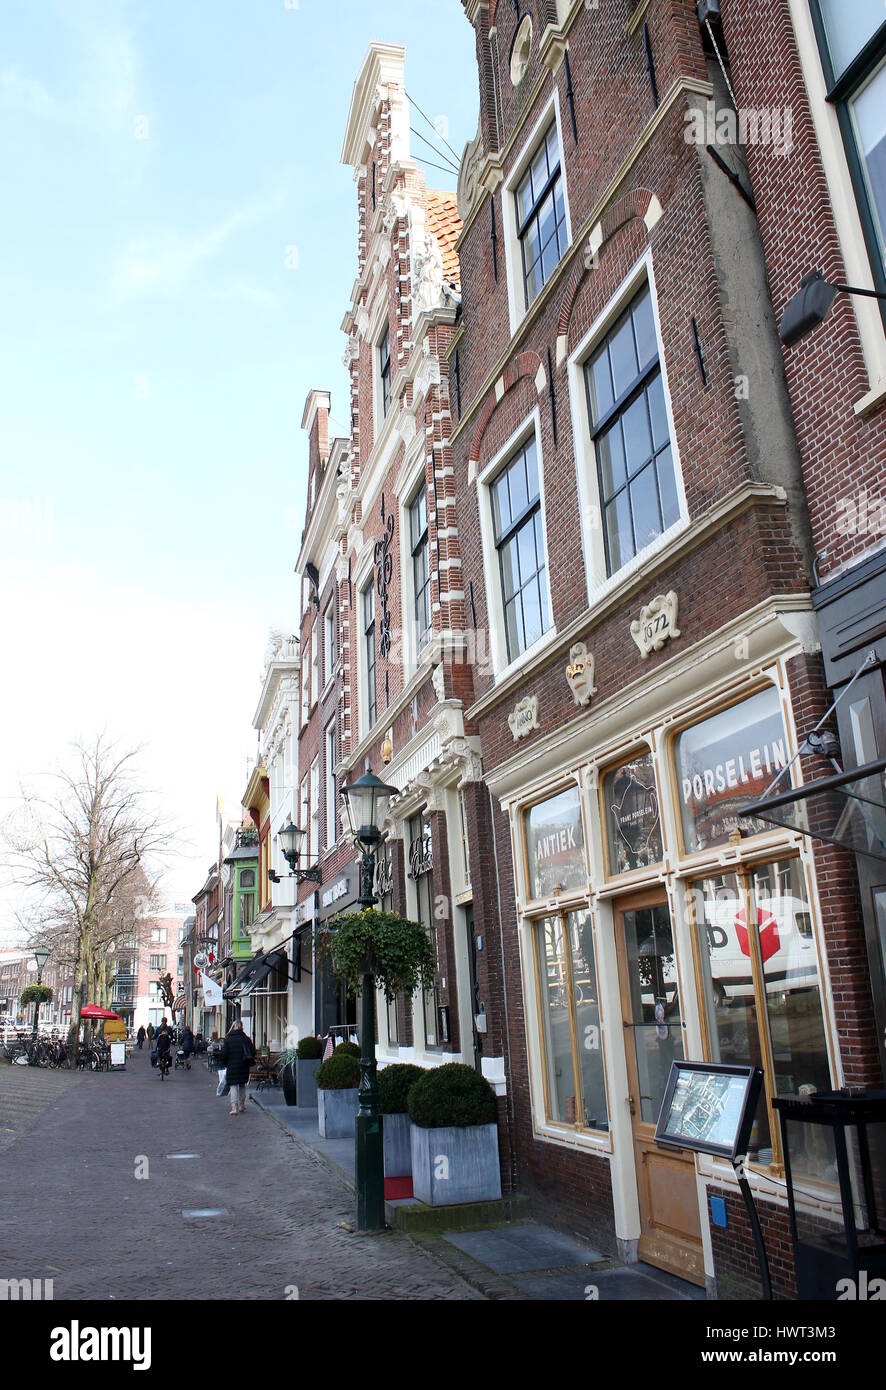 Old historic buildings at Mient street, central Alkmaar, Netherlands. Stock Photo